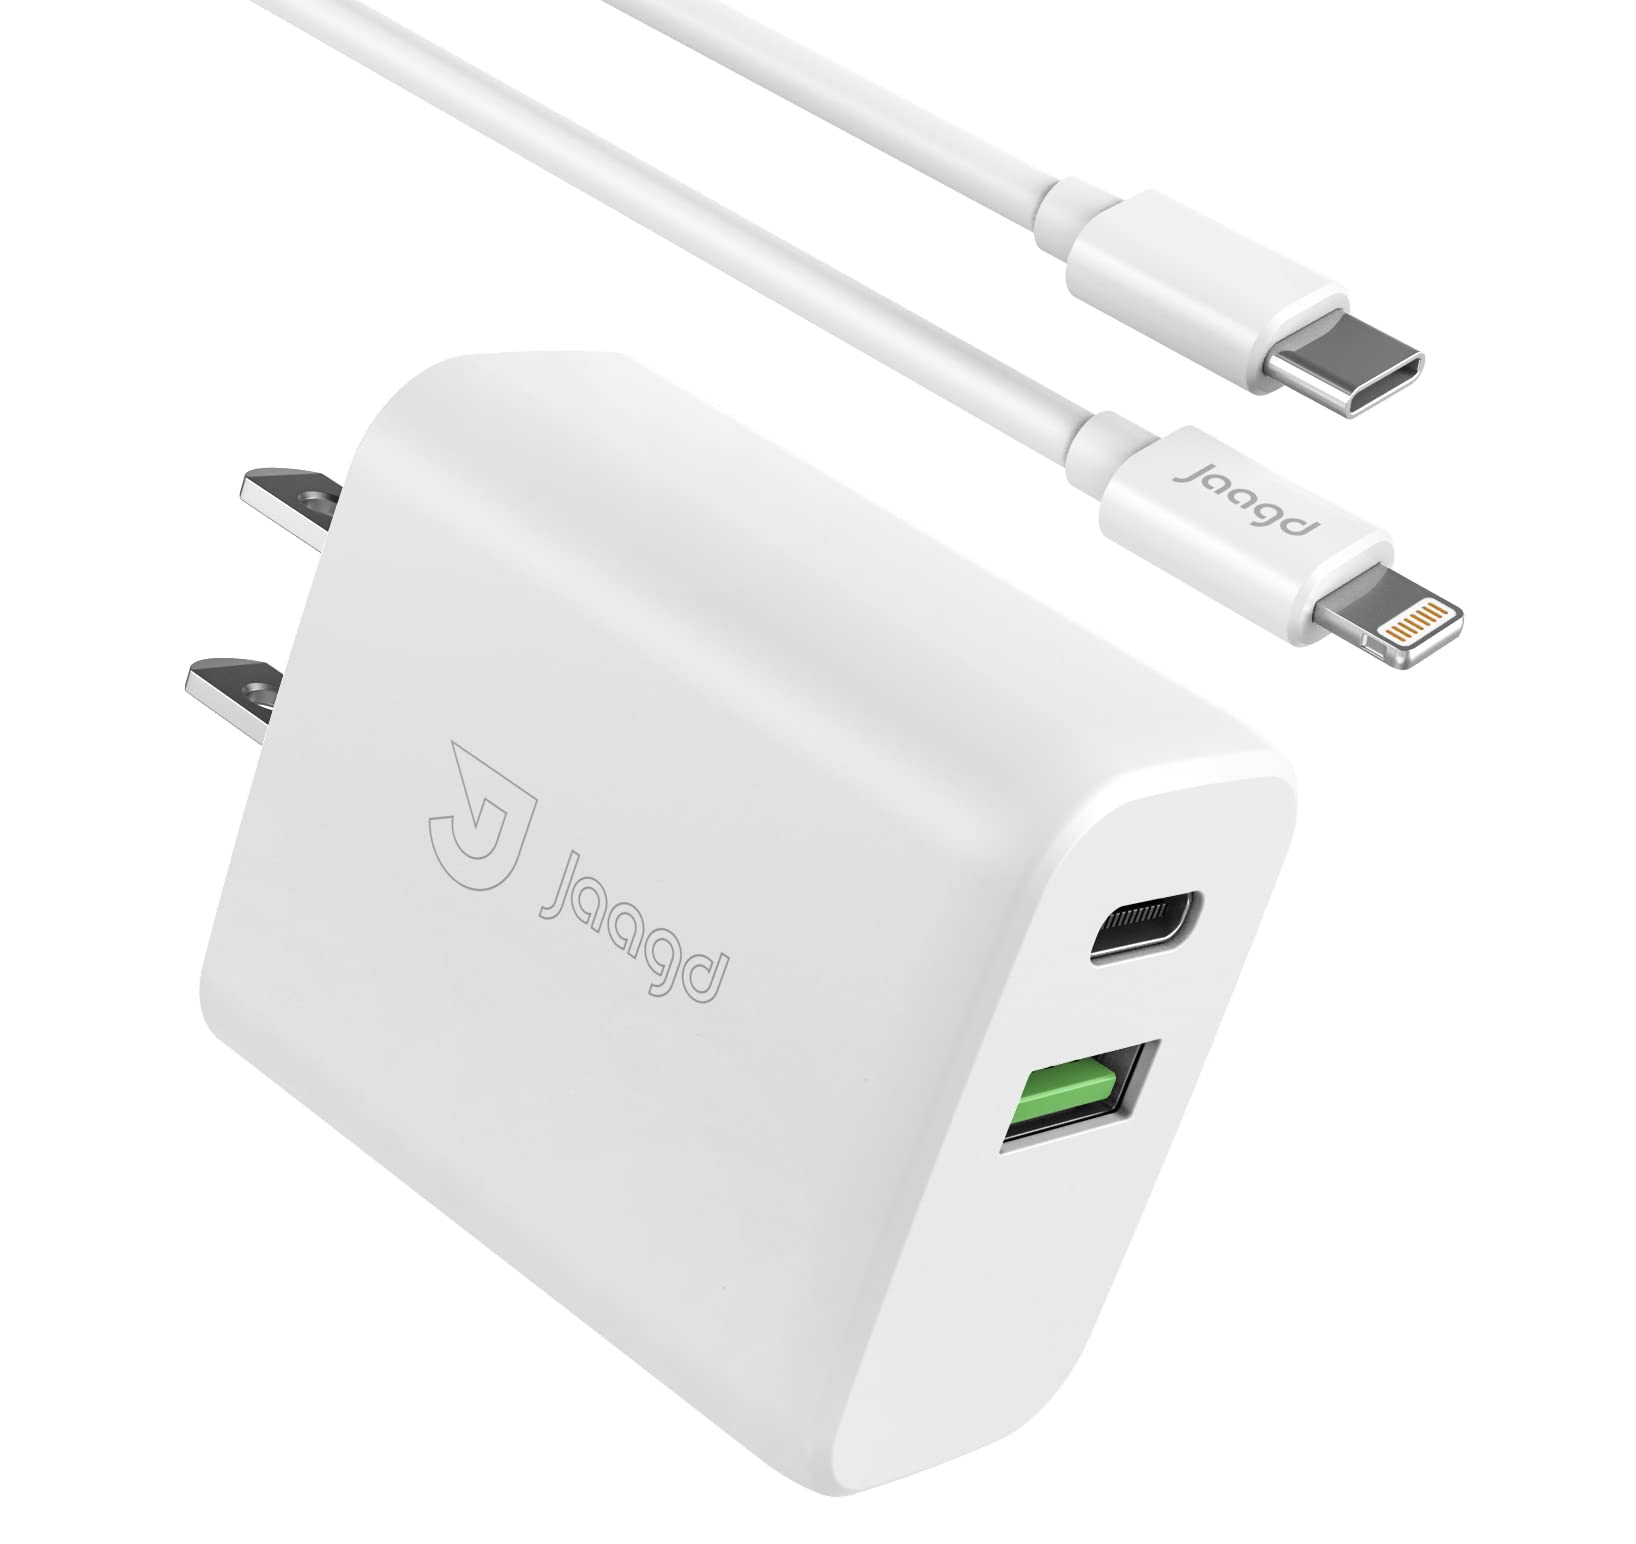 Jaagd 20W Apple MFi Certified iPhone Charger, USB C and USB Dual Wall Charger Set with Type-C Lightning Cable Compatible with iPhone 14/13/13 Pro/13 Pro max/iPhone 12/12 Pro max/X and More